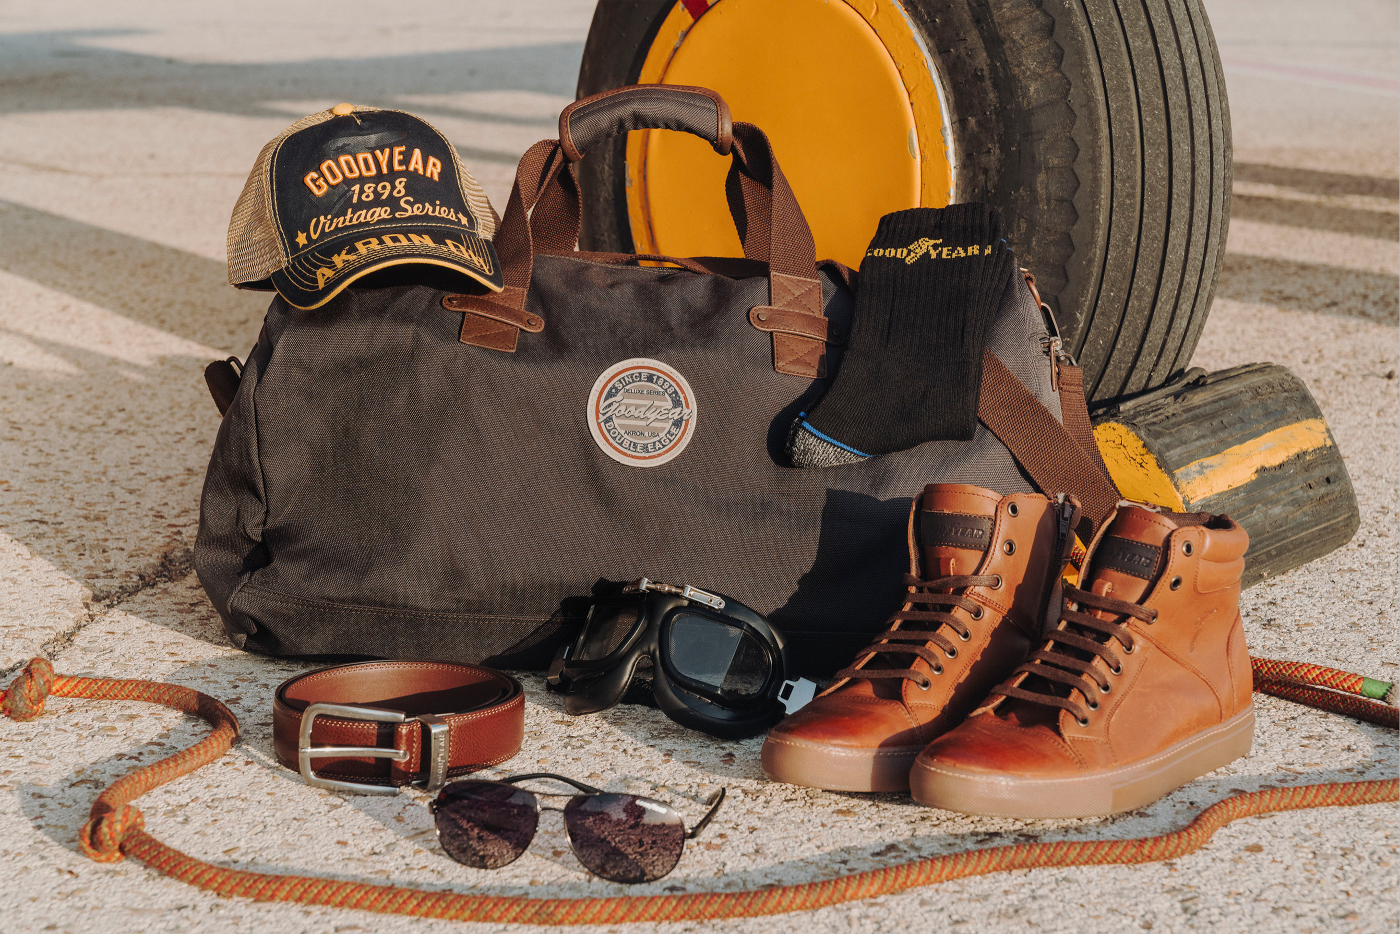 Goodyear Apparel and Accessories Collection